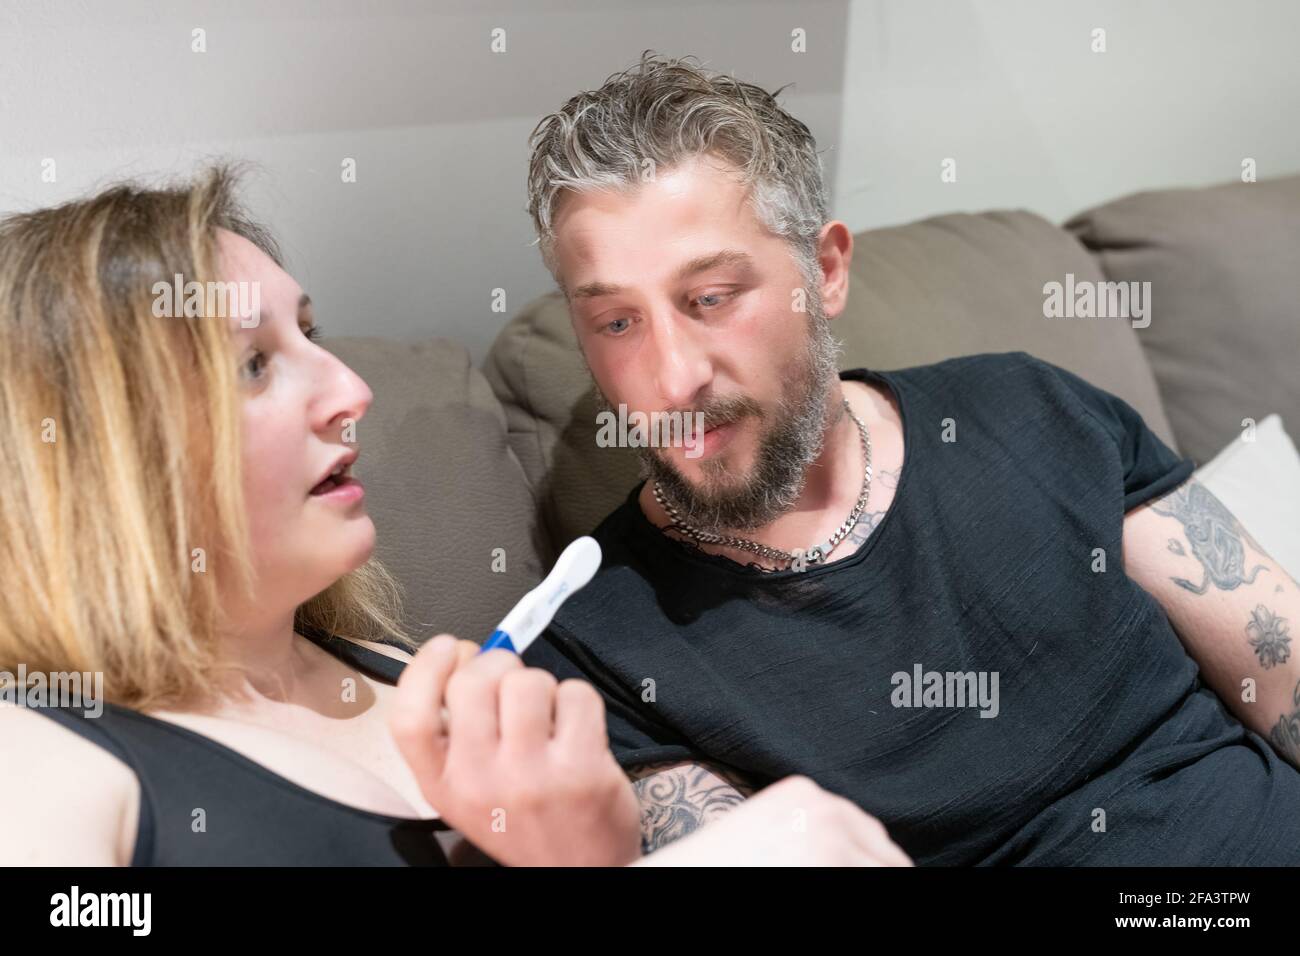 Excited married couple discovering result of pregnancy test. Surprised man face expression. Stock Photo